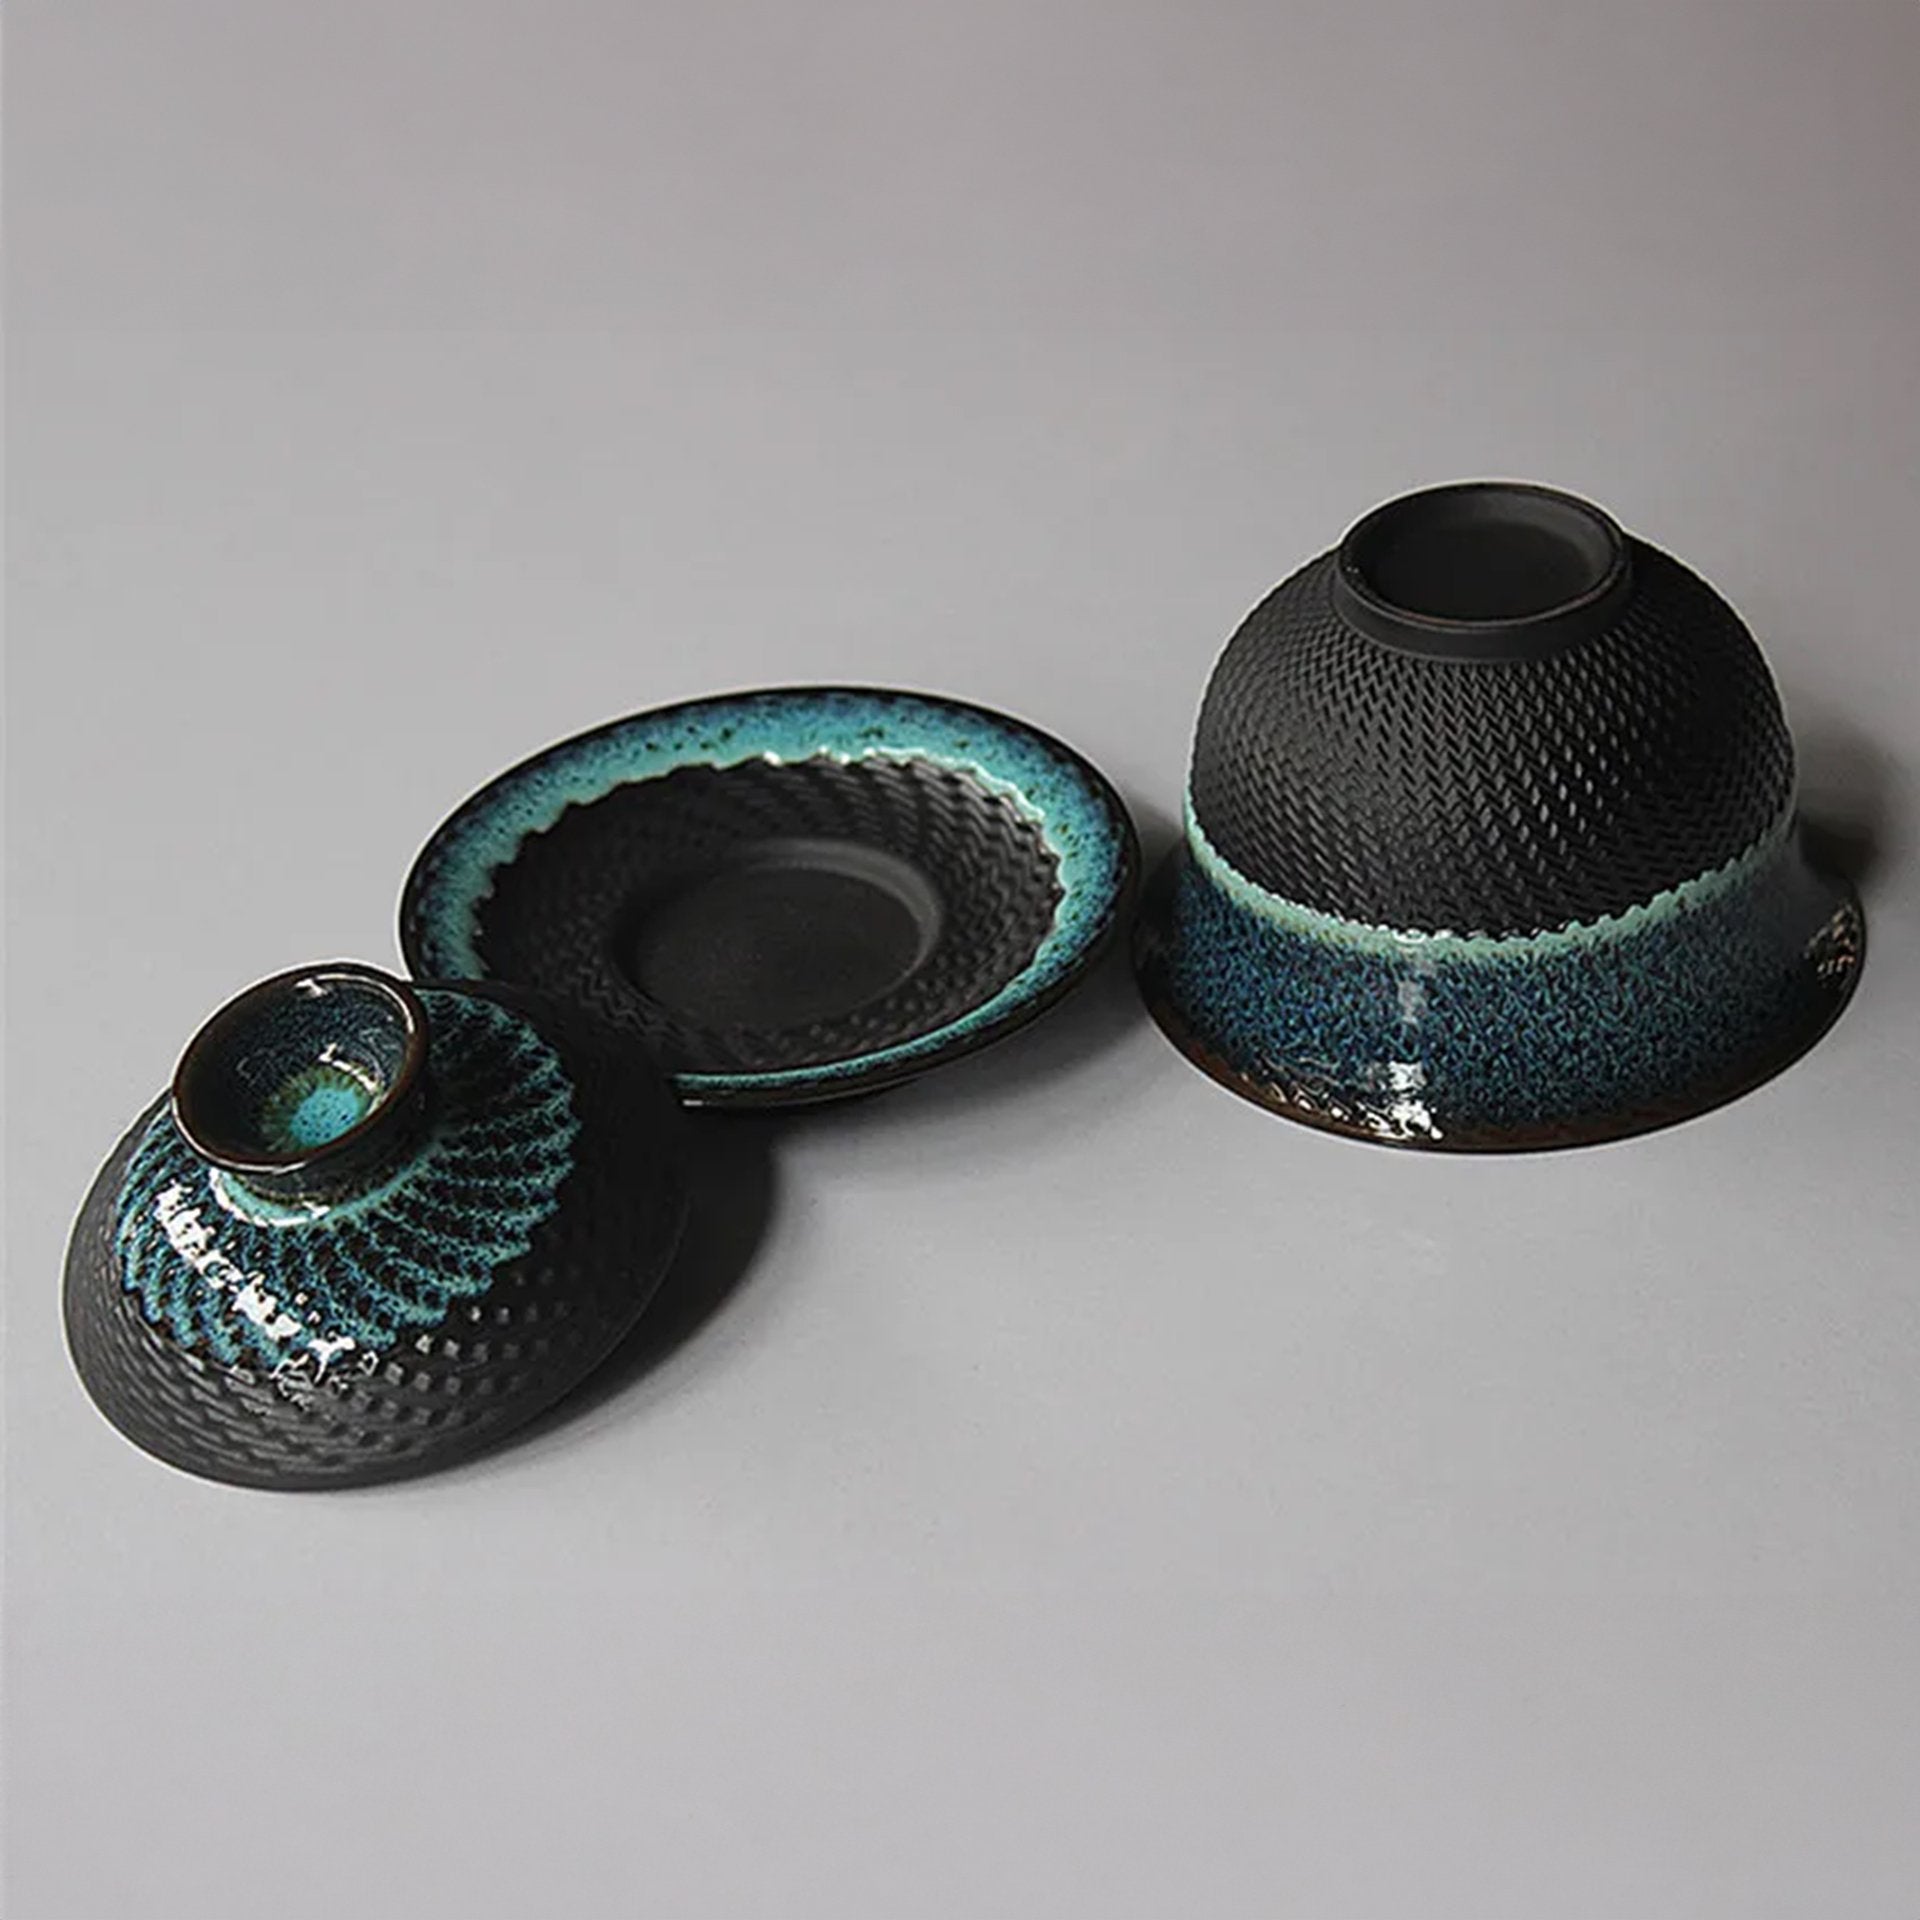 Blue textured tea set with bowl, lid, and saucer on grey.